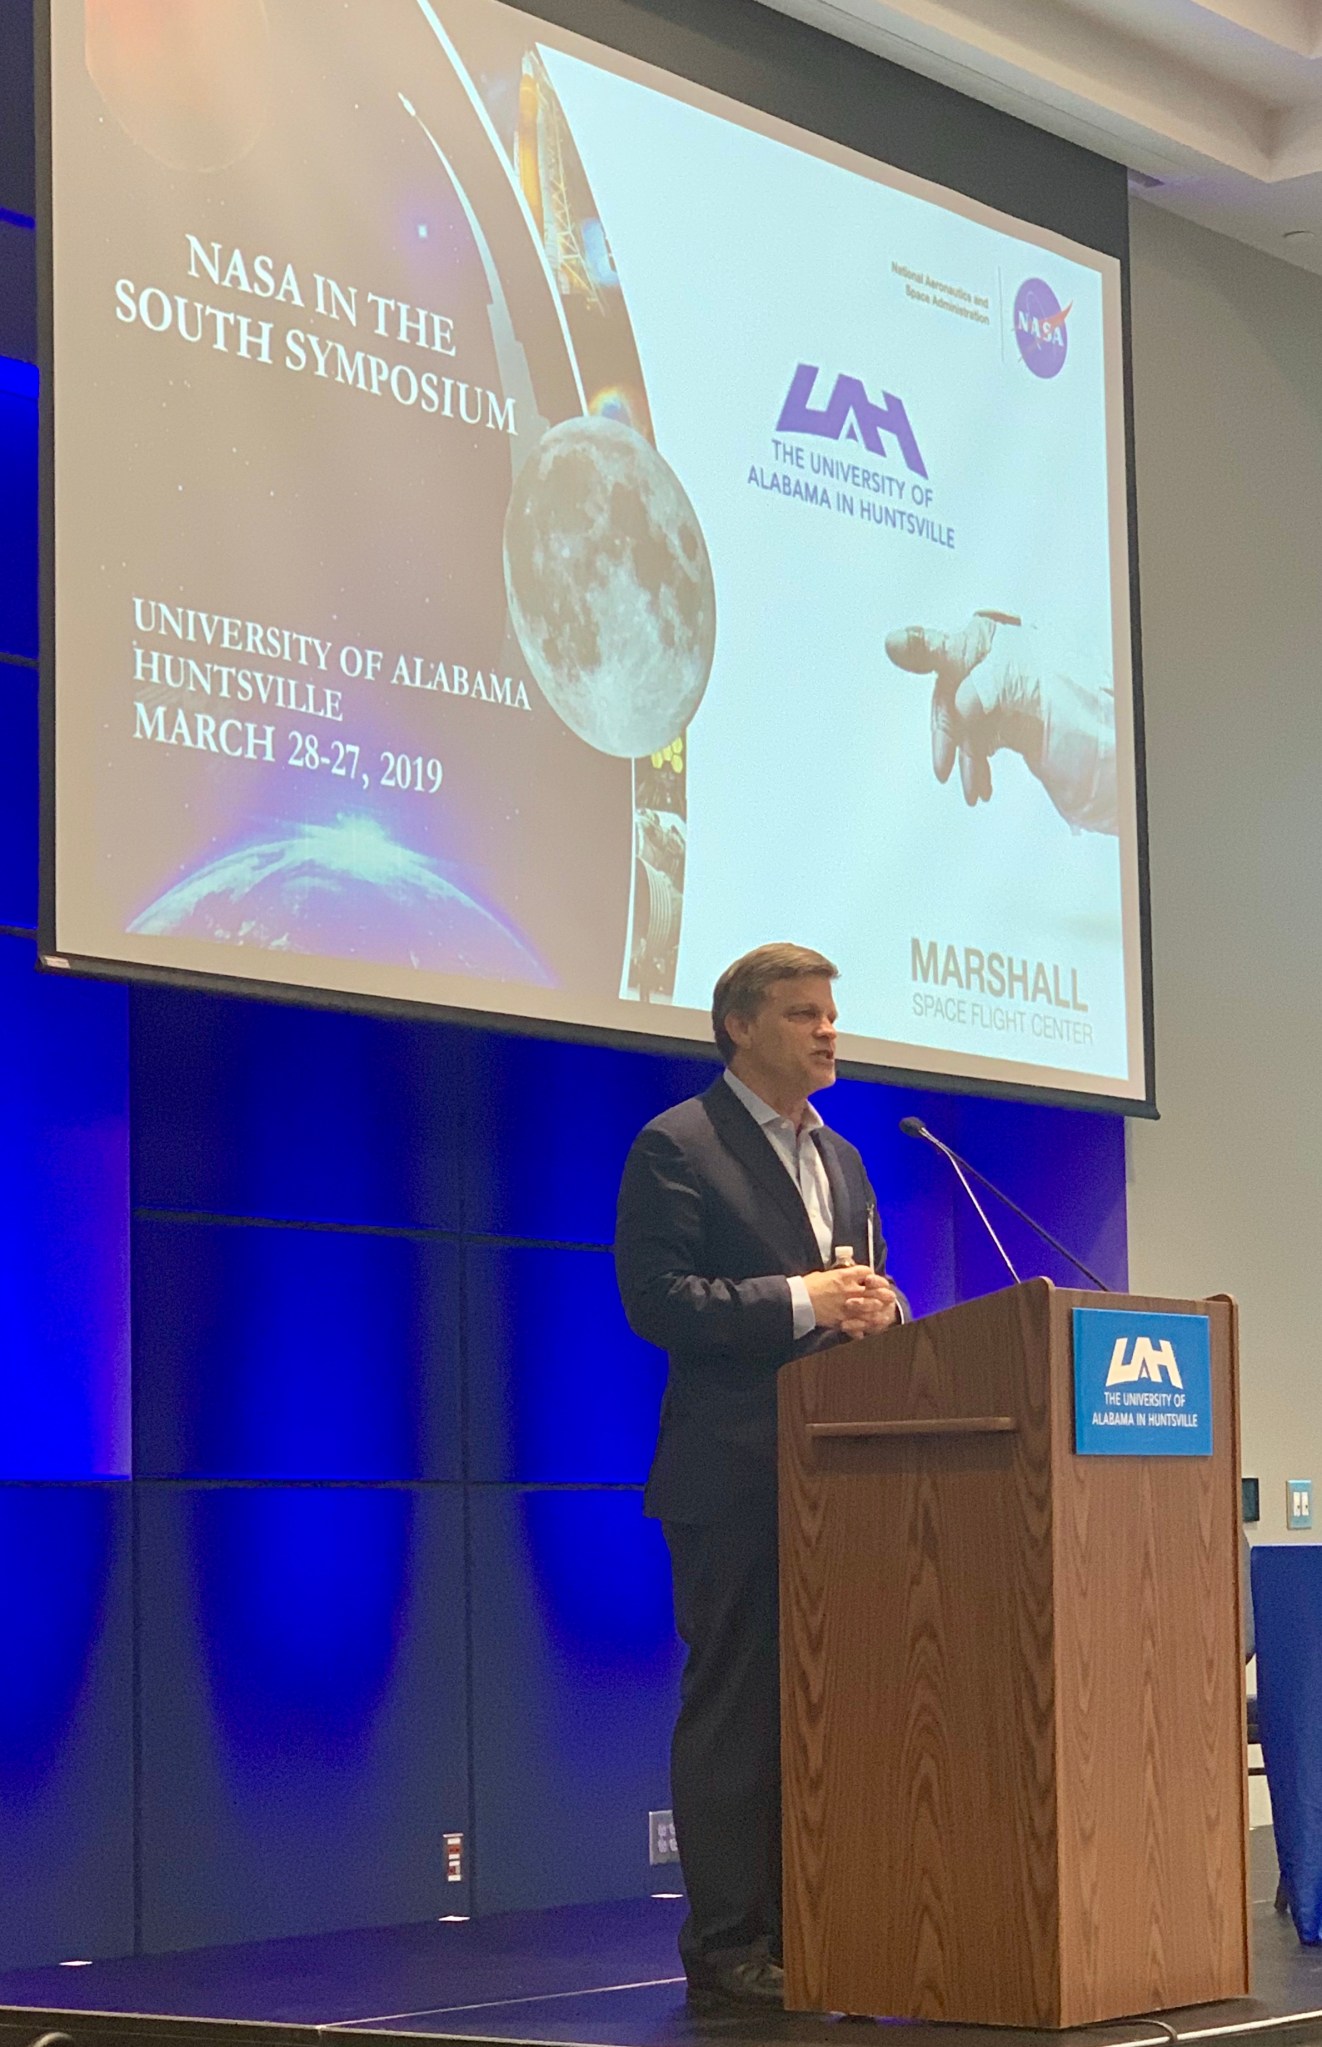 Douglas Brinkley, opening keynote speaker at the NASA in the South Symposium March 28, 2019.